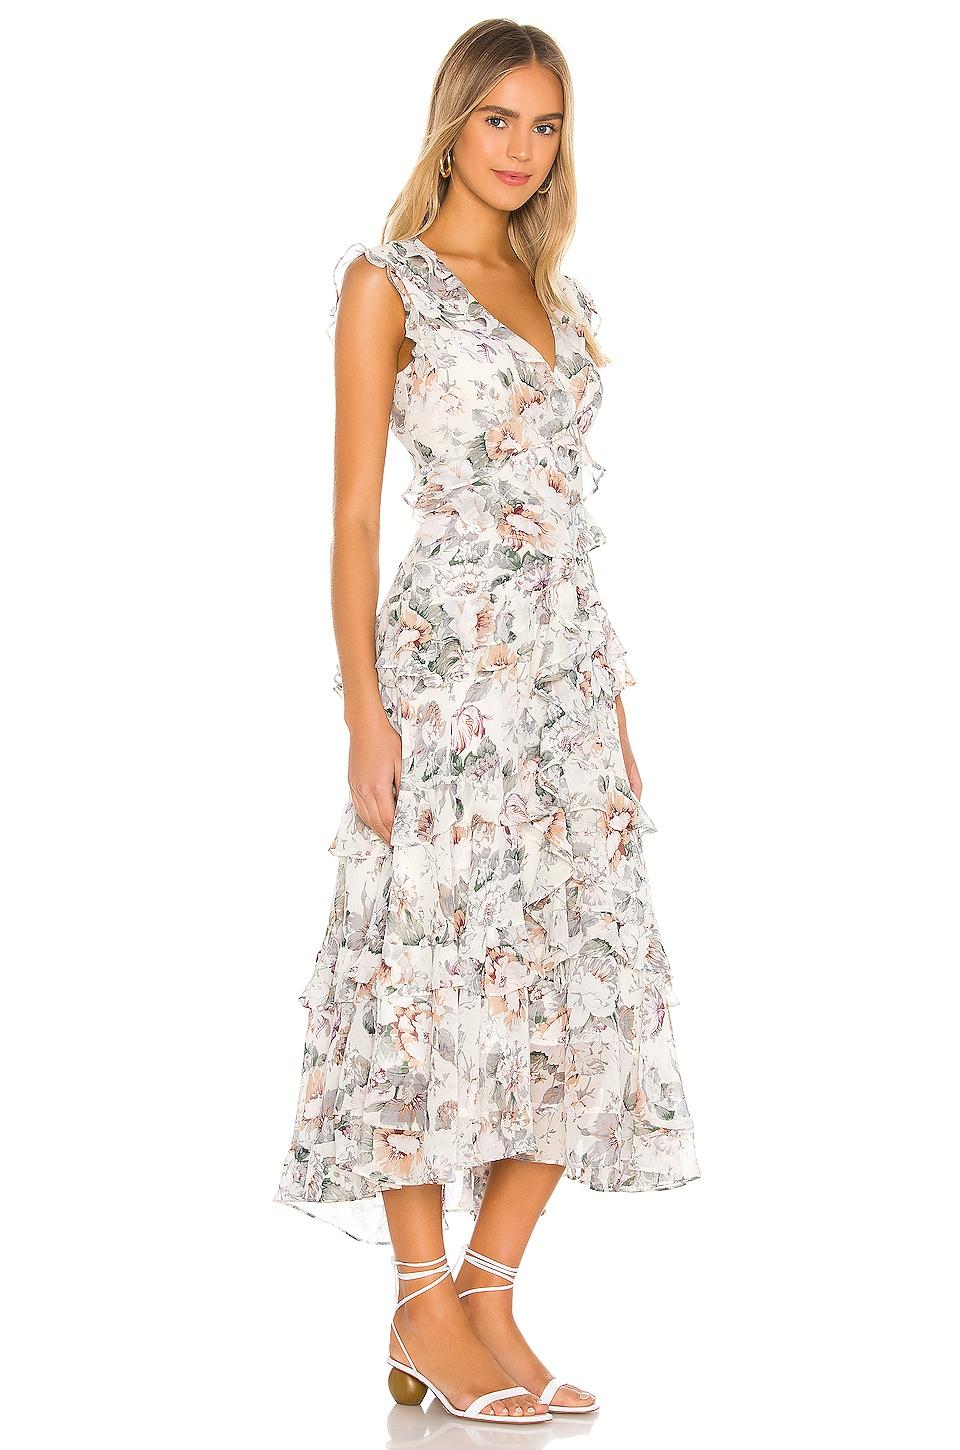 Bardot Chiffon Nelly Floral Dress in Ivory Floral (White) - Lyst